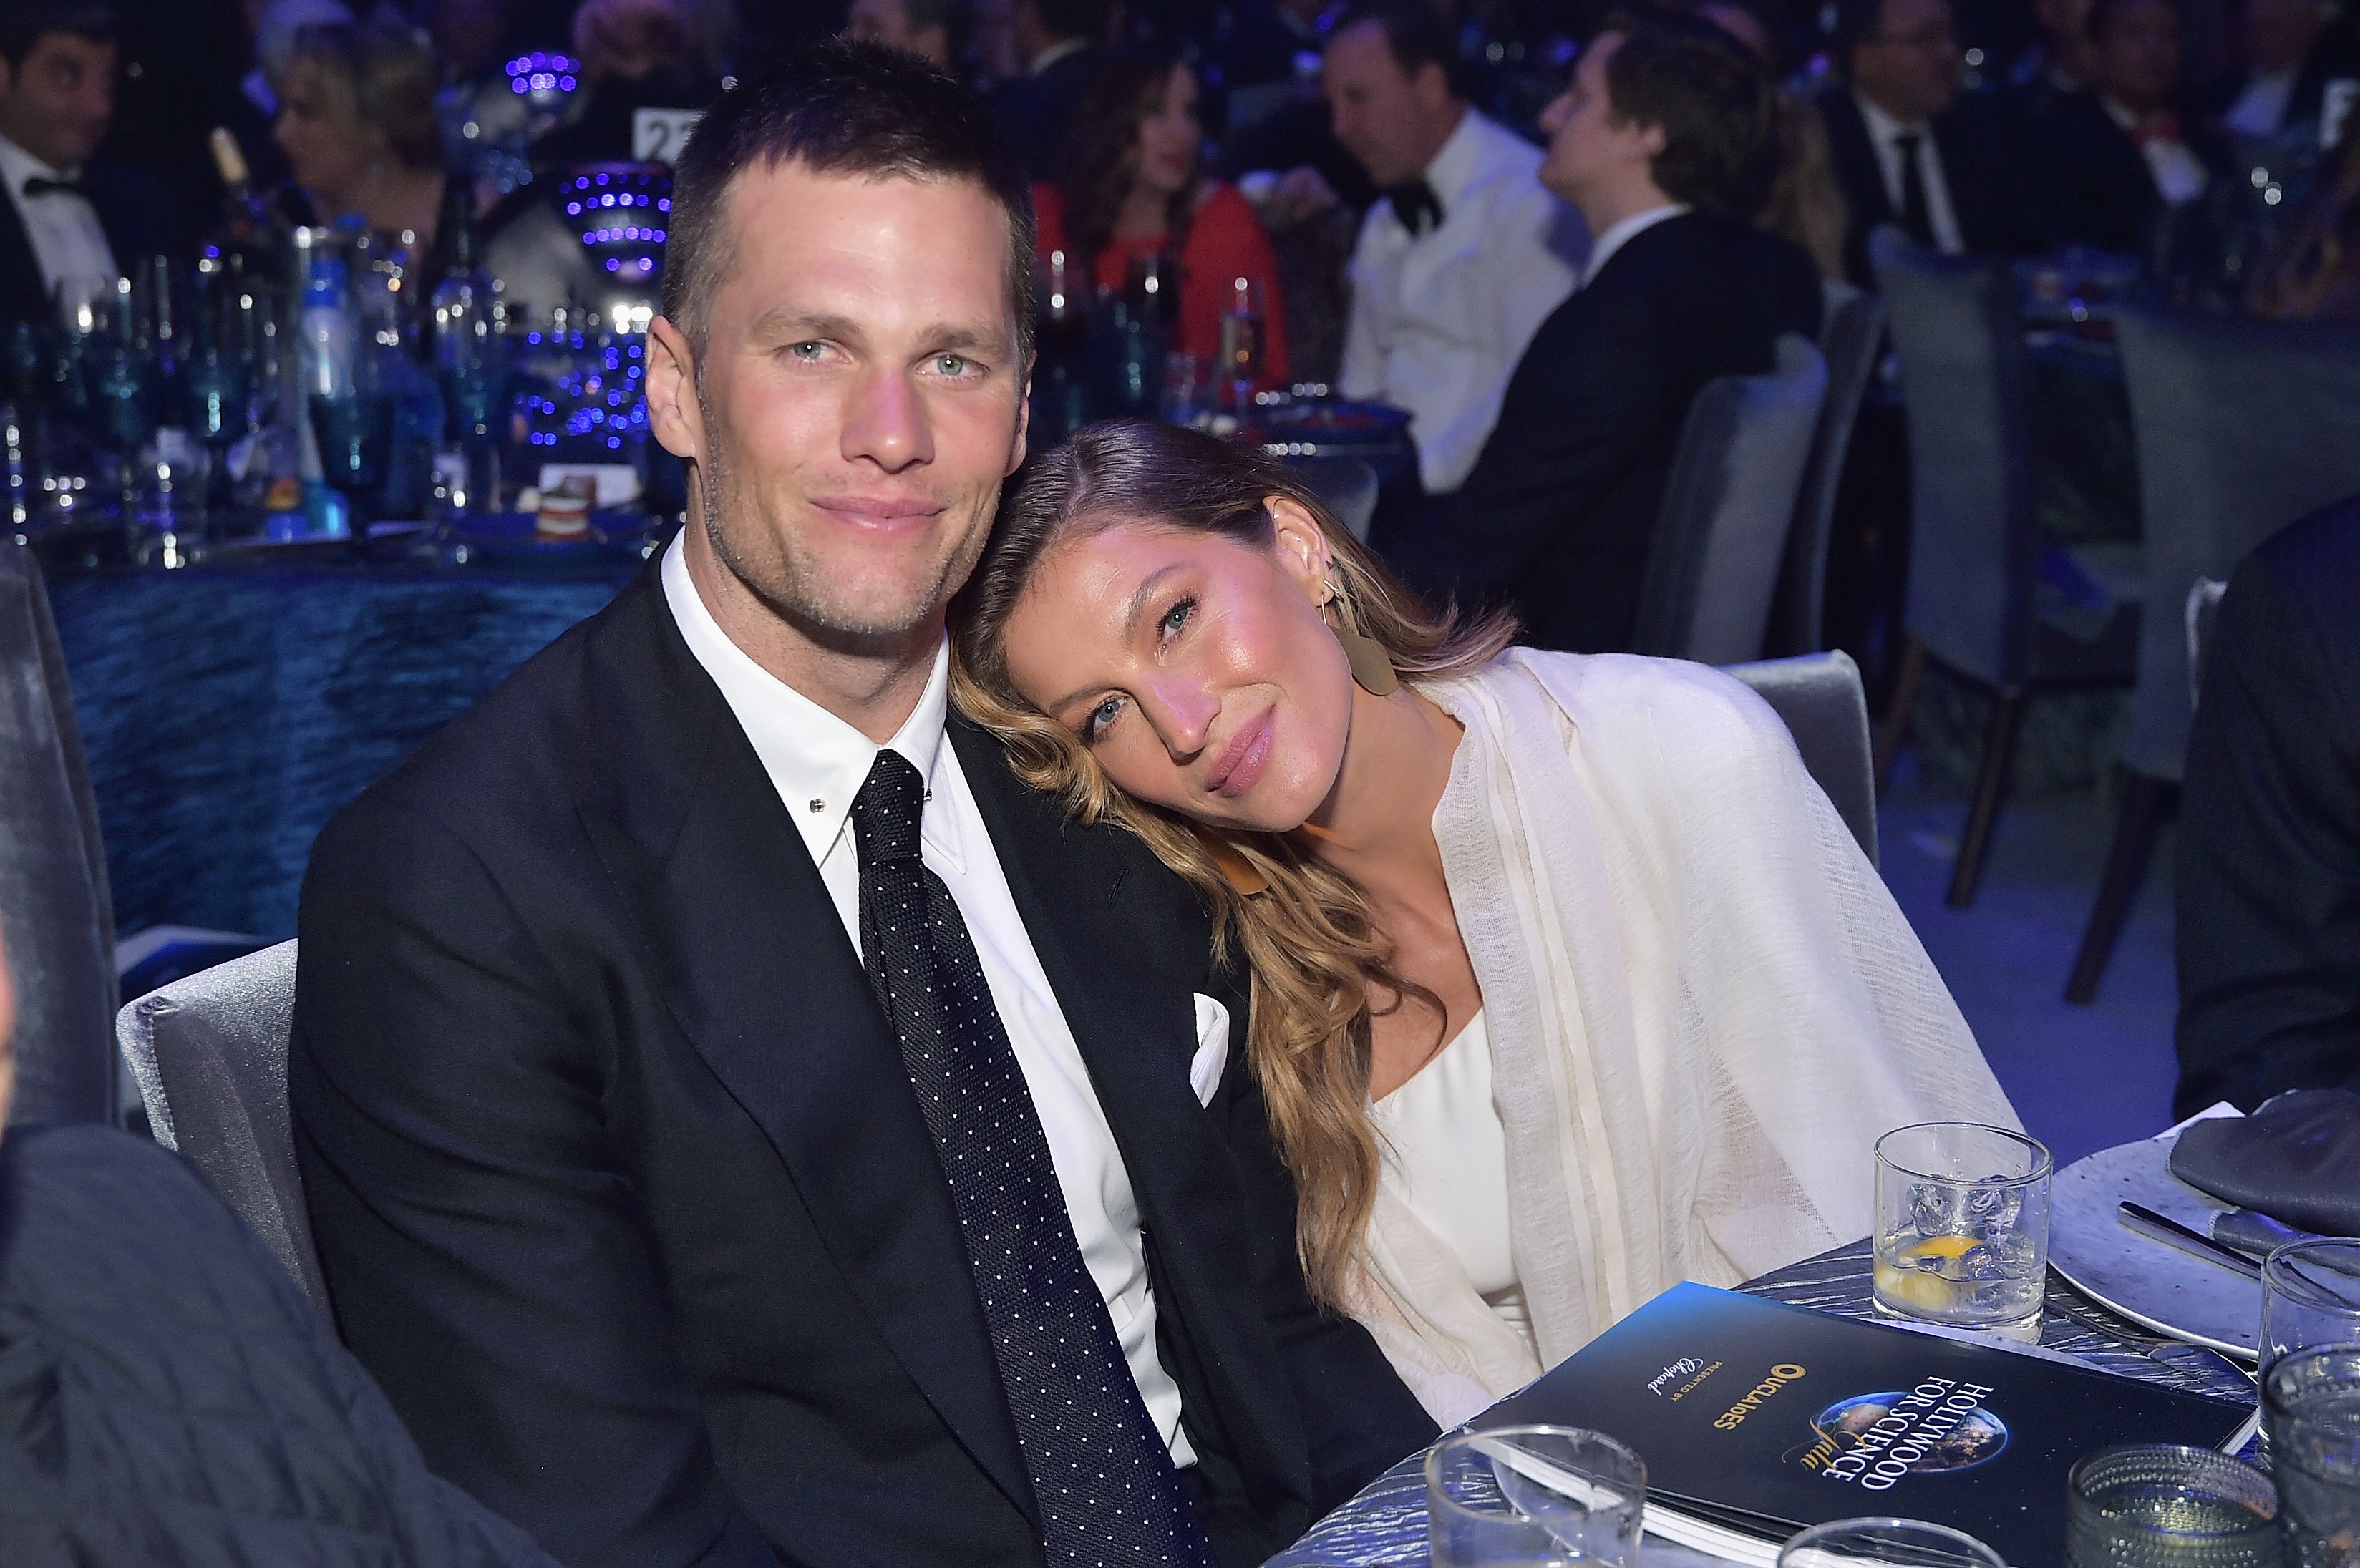 Megyn Kelly Doesn’t Believe Tom Brady and Gisele Bundchen Divorced Over Football: ‘Who Would Let a Beautiful Marriage Fall Apart Because of Football?’